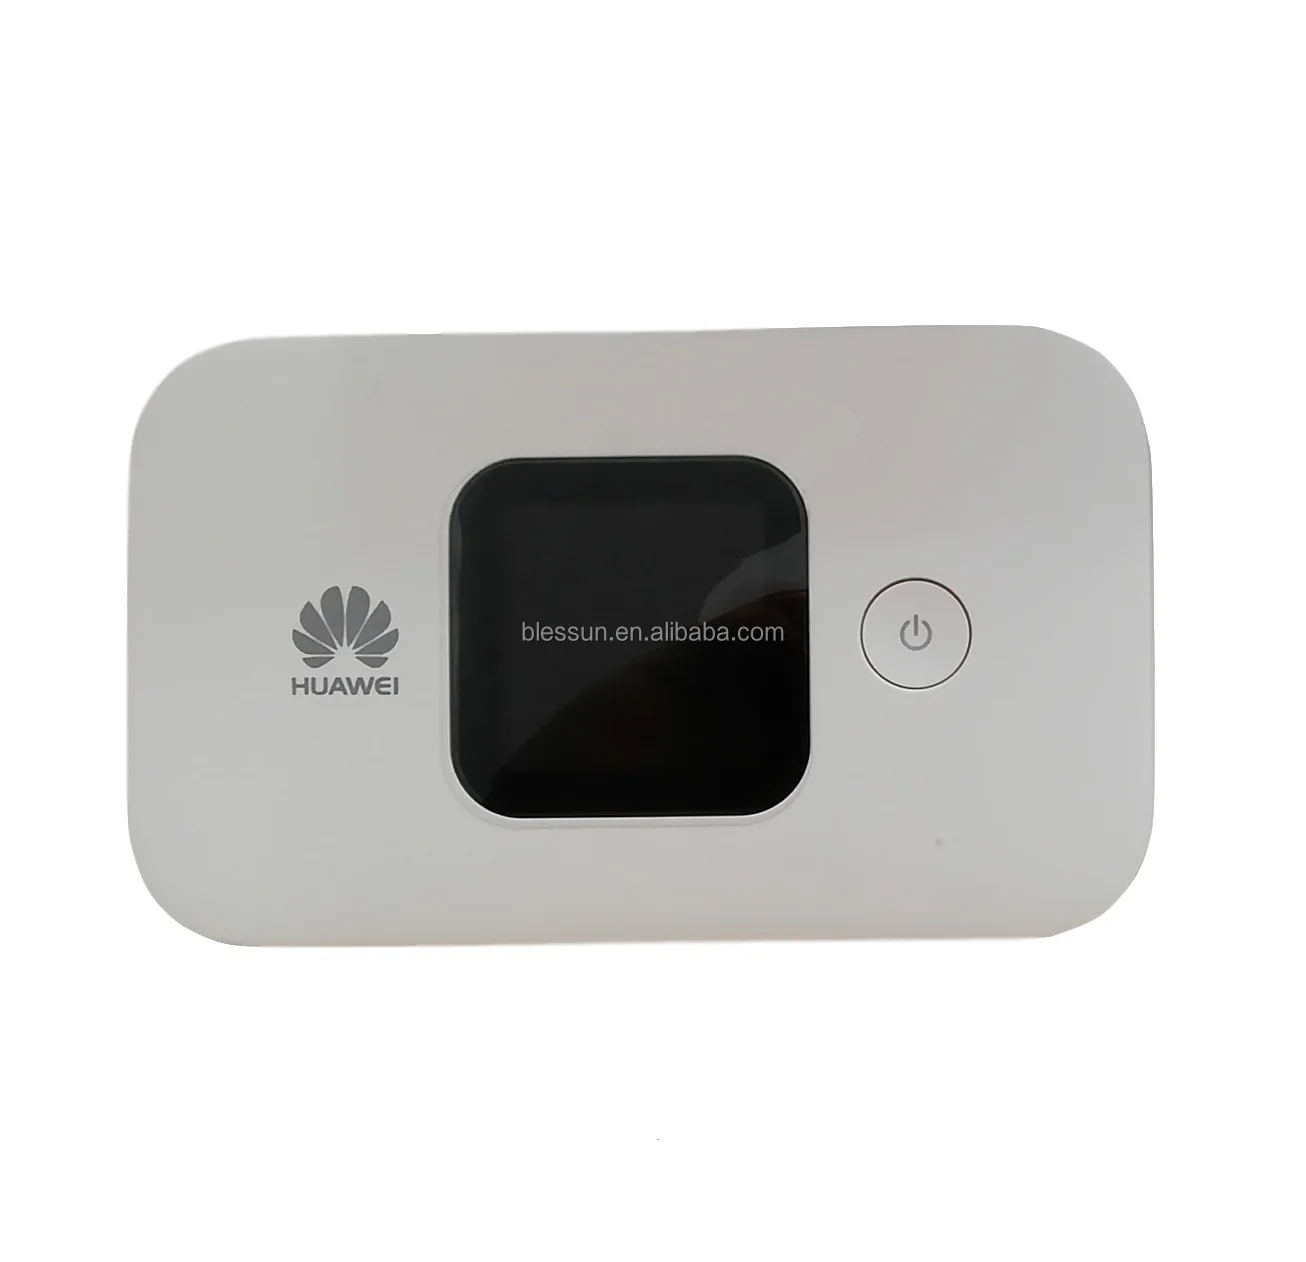 Konsultere volatilitet tricky Wholesale Unlocked for Huawei E5577 E5577S-321 150Mbps 4G LTE Modem WiFi  Router With Sim Card Slot And 3000mAh Battery From m.alibaba.com